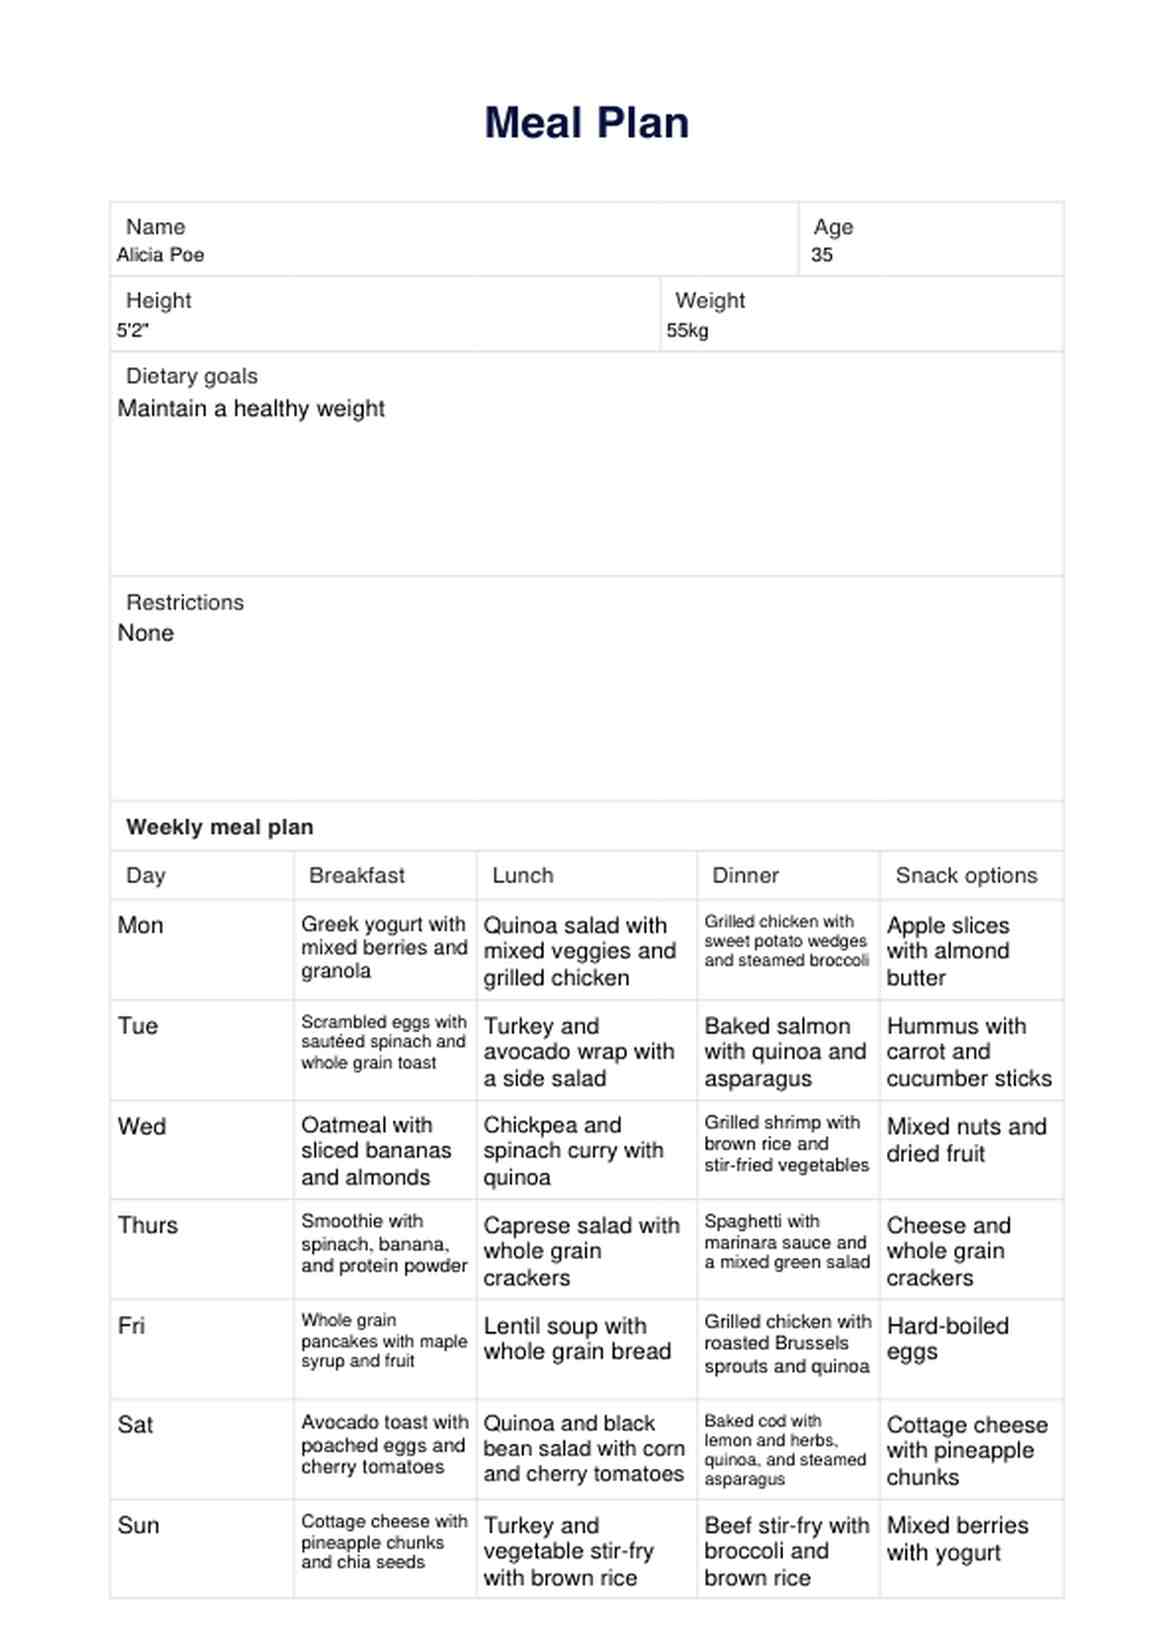 Meal Plan Template PDF Example